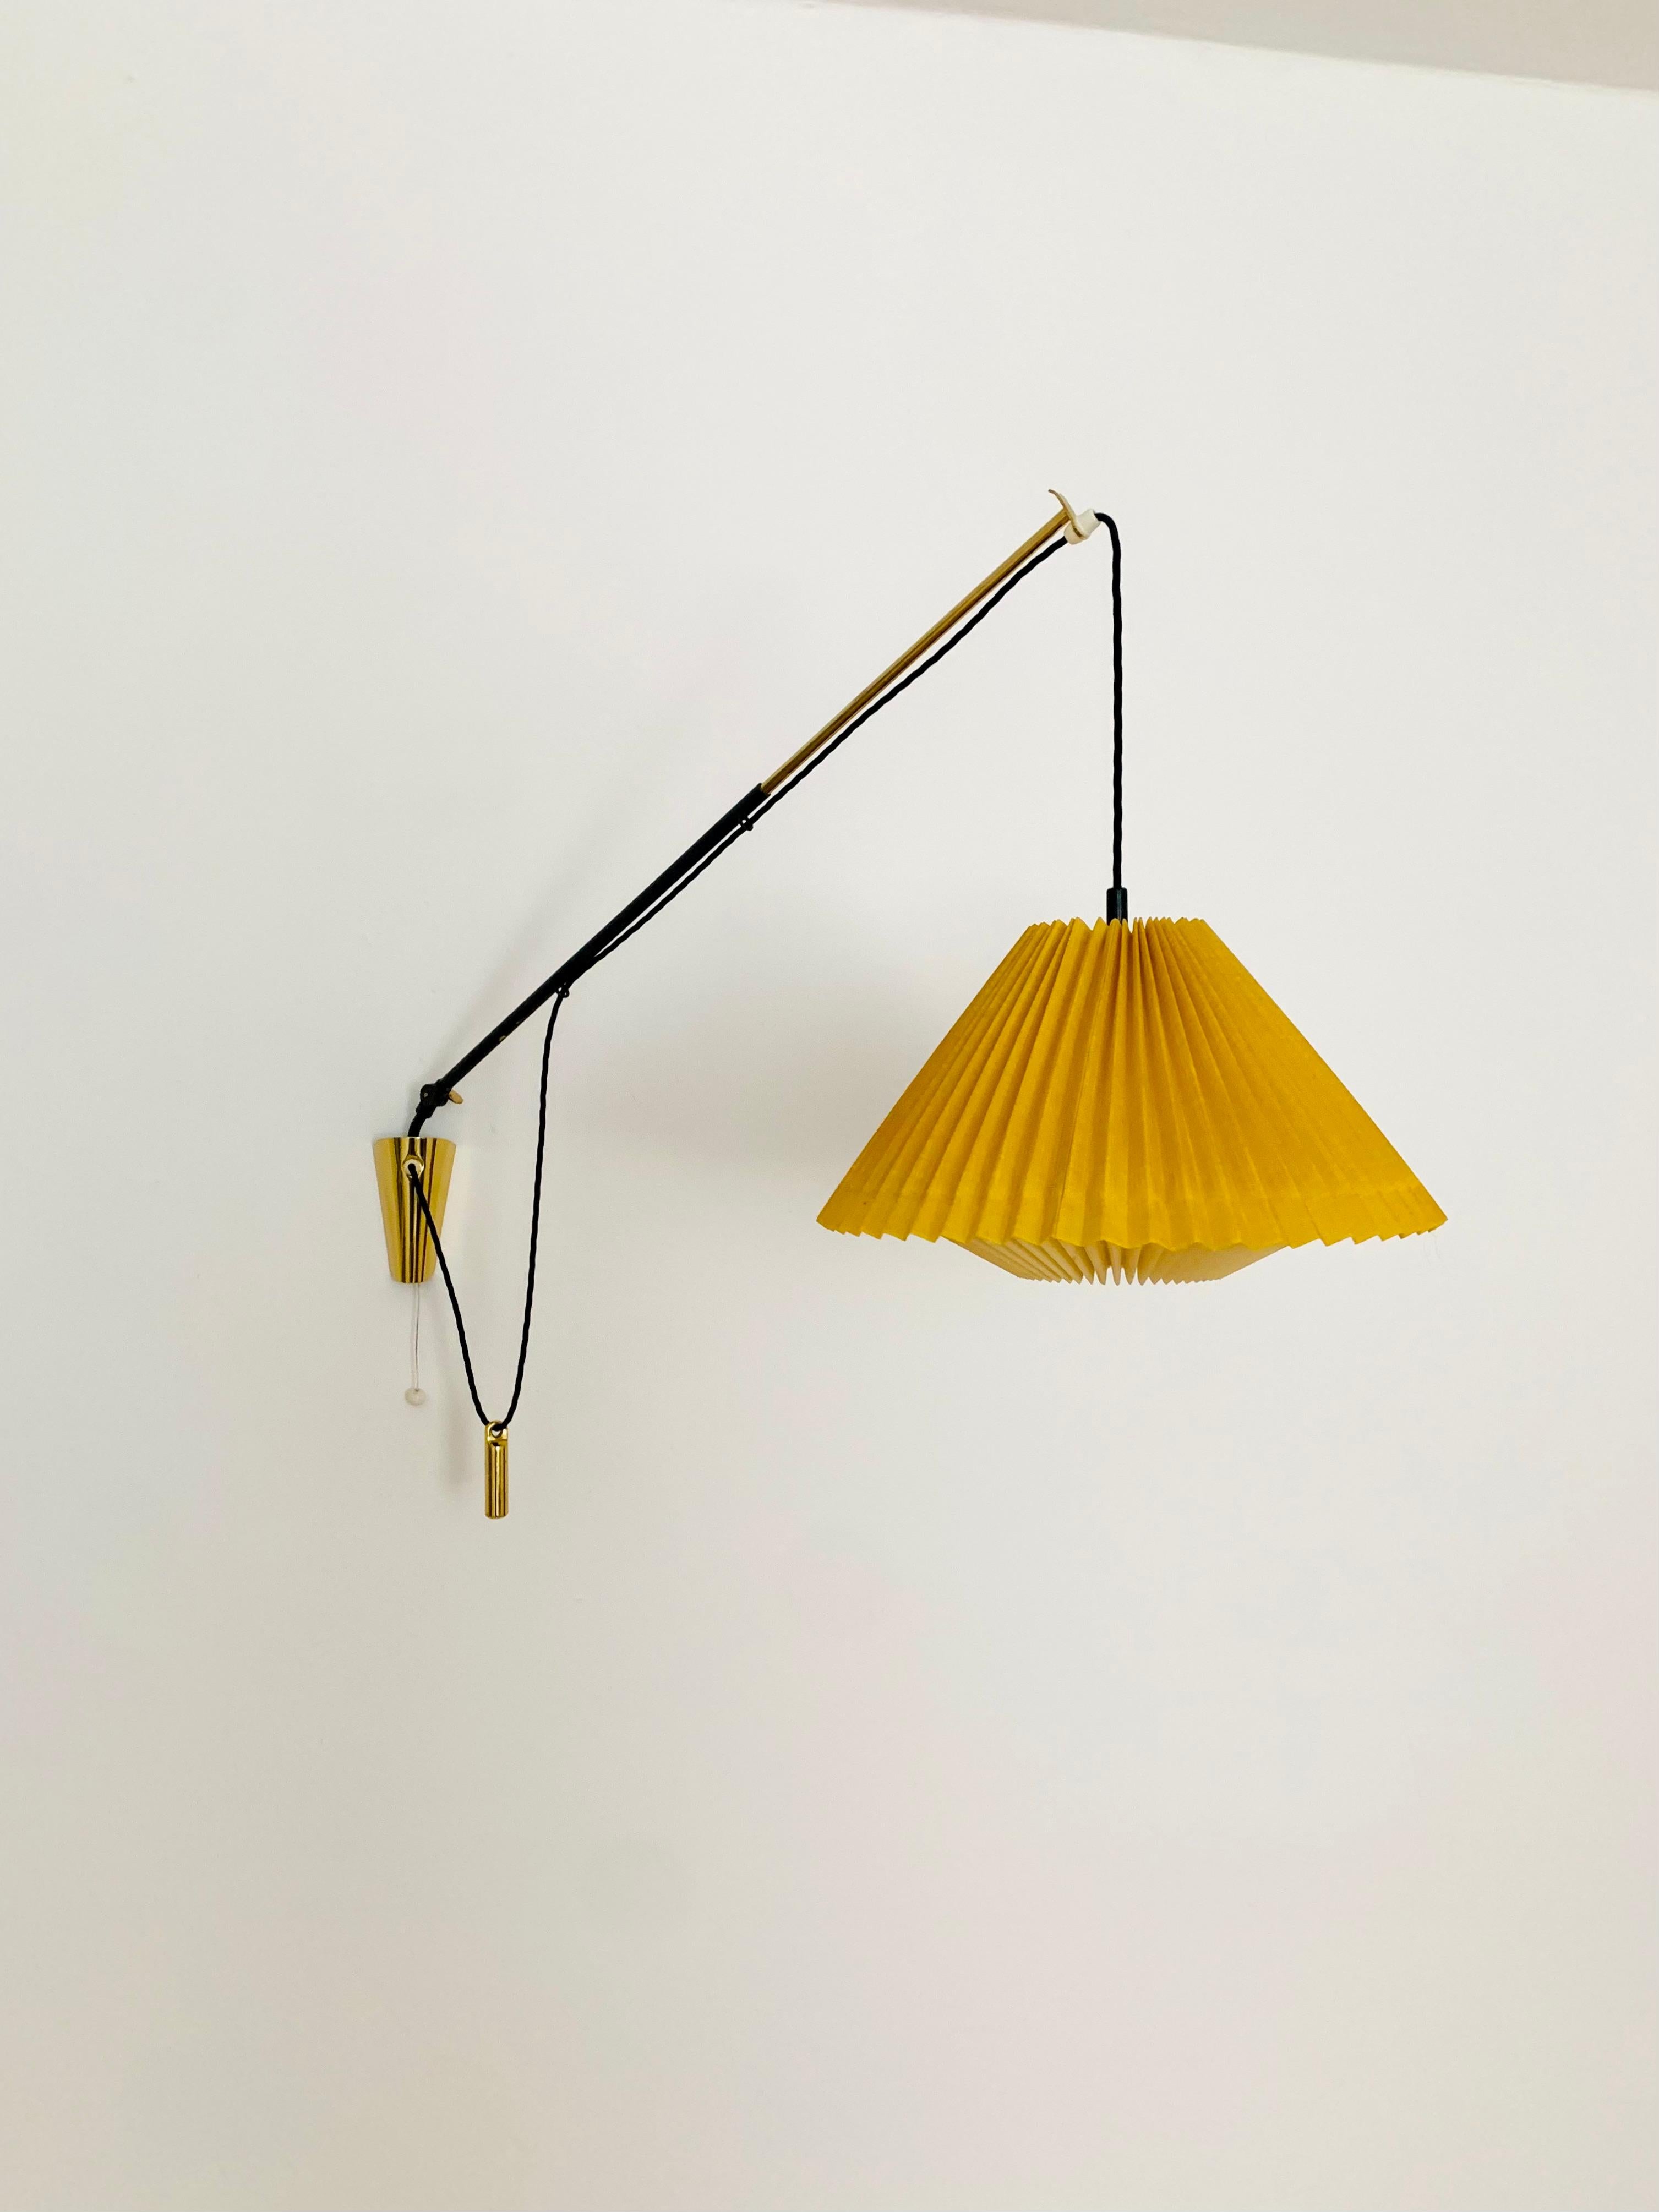 Charming adjustable wall lamp from the 1950s.
Great and exceptionally minimalistic design with a fantastically elegant look.
Very nice swiveling and extendable brass arm.
The pleated lampshade creates a wonderful play of light and a very cozy